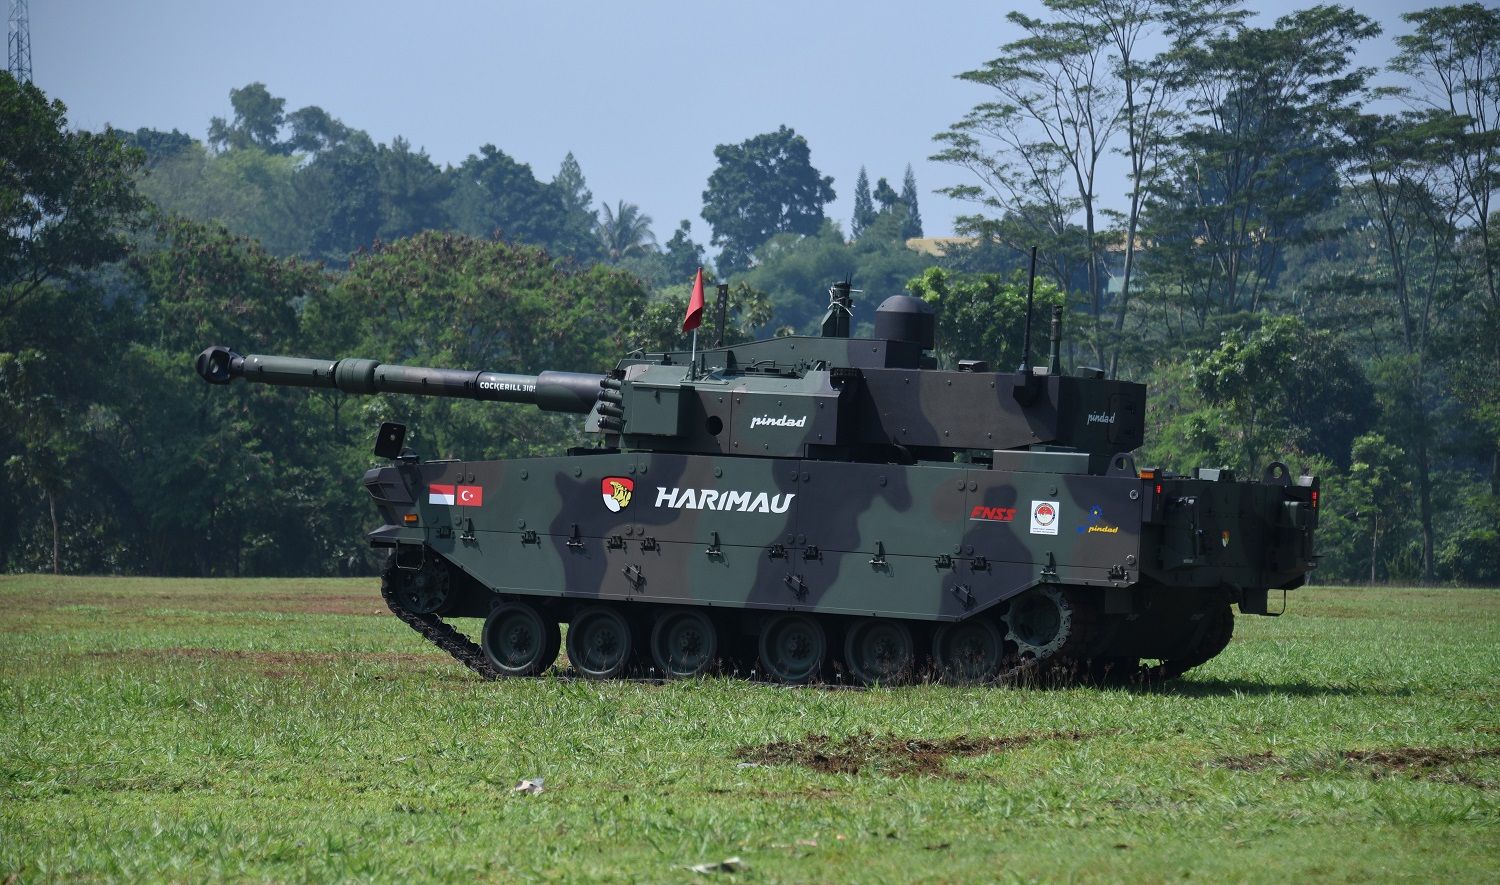 KAPLAN MT, a medium-weight class tank developed jointly by FNSS and the Indonesian company PT Pindad, is being equipped with ASELSAN’s PULAT Active Protection System to defend against the evolving threats in the battlefield. KAPLAN MT equipped with PULAT is displayed for the first time at IDEF 2019.